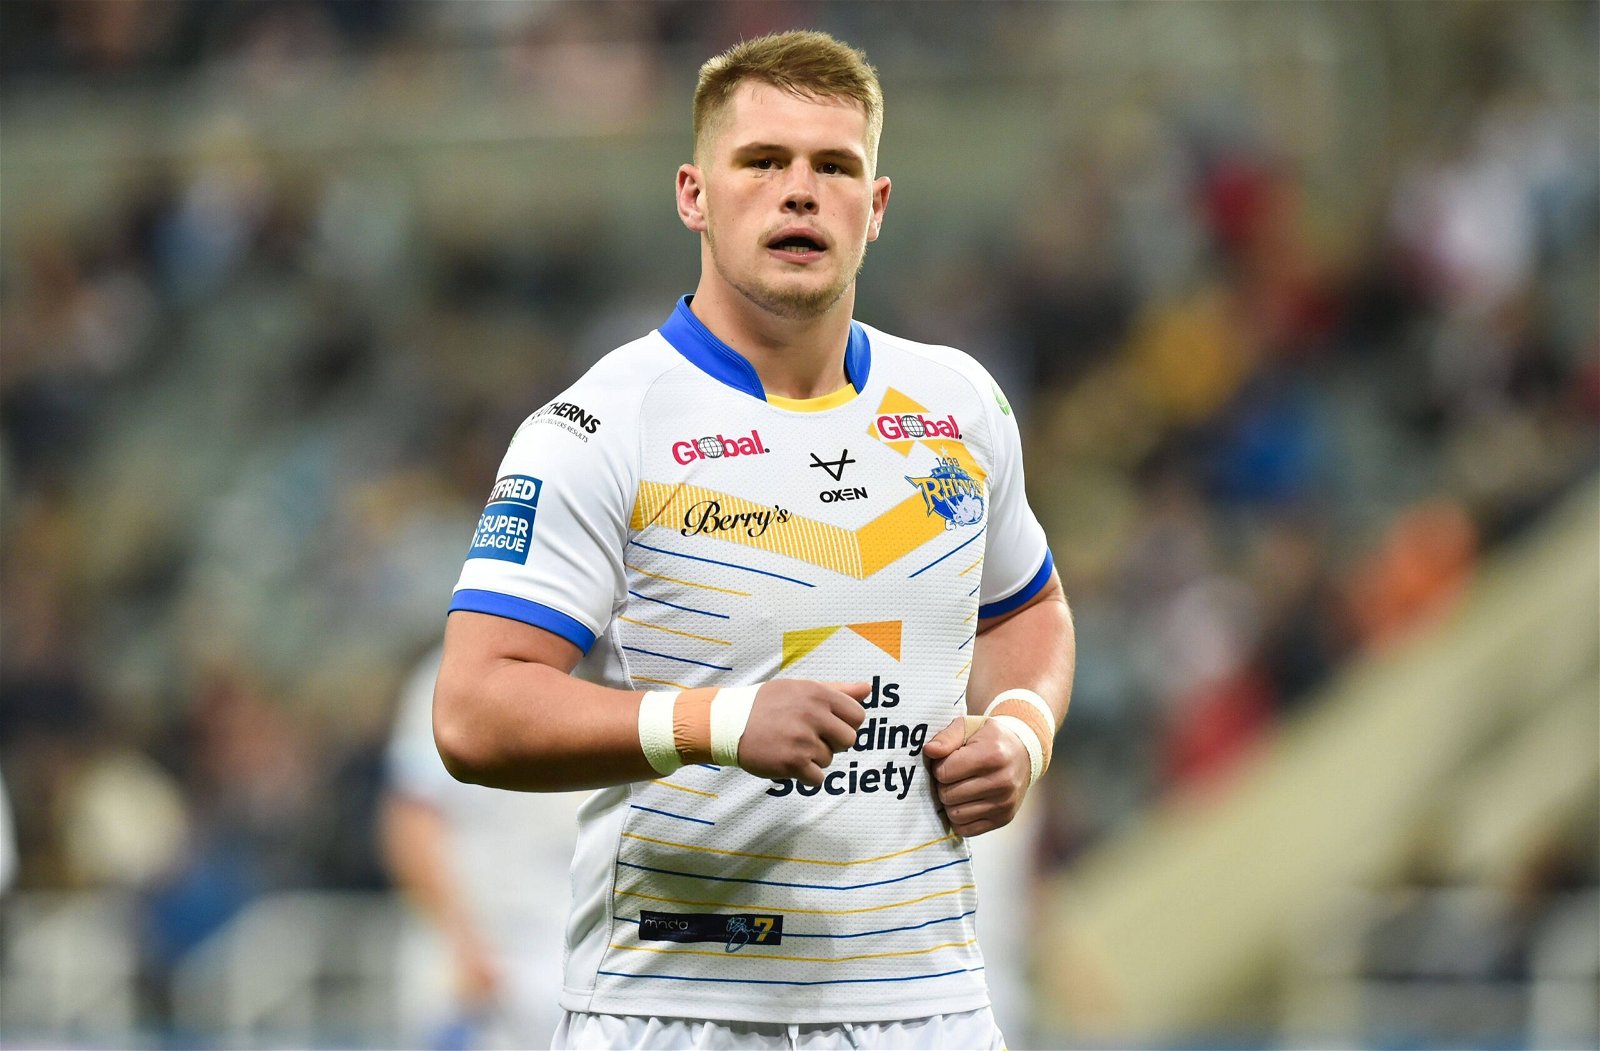 Leeds Rhinos Player Reveals The Signing Is Pushing Us To Be Better